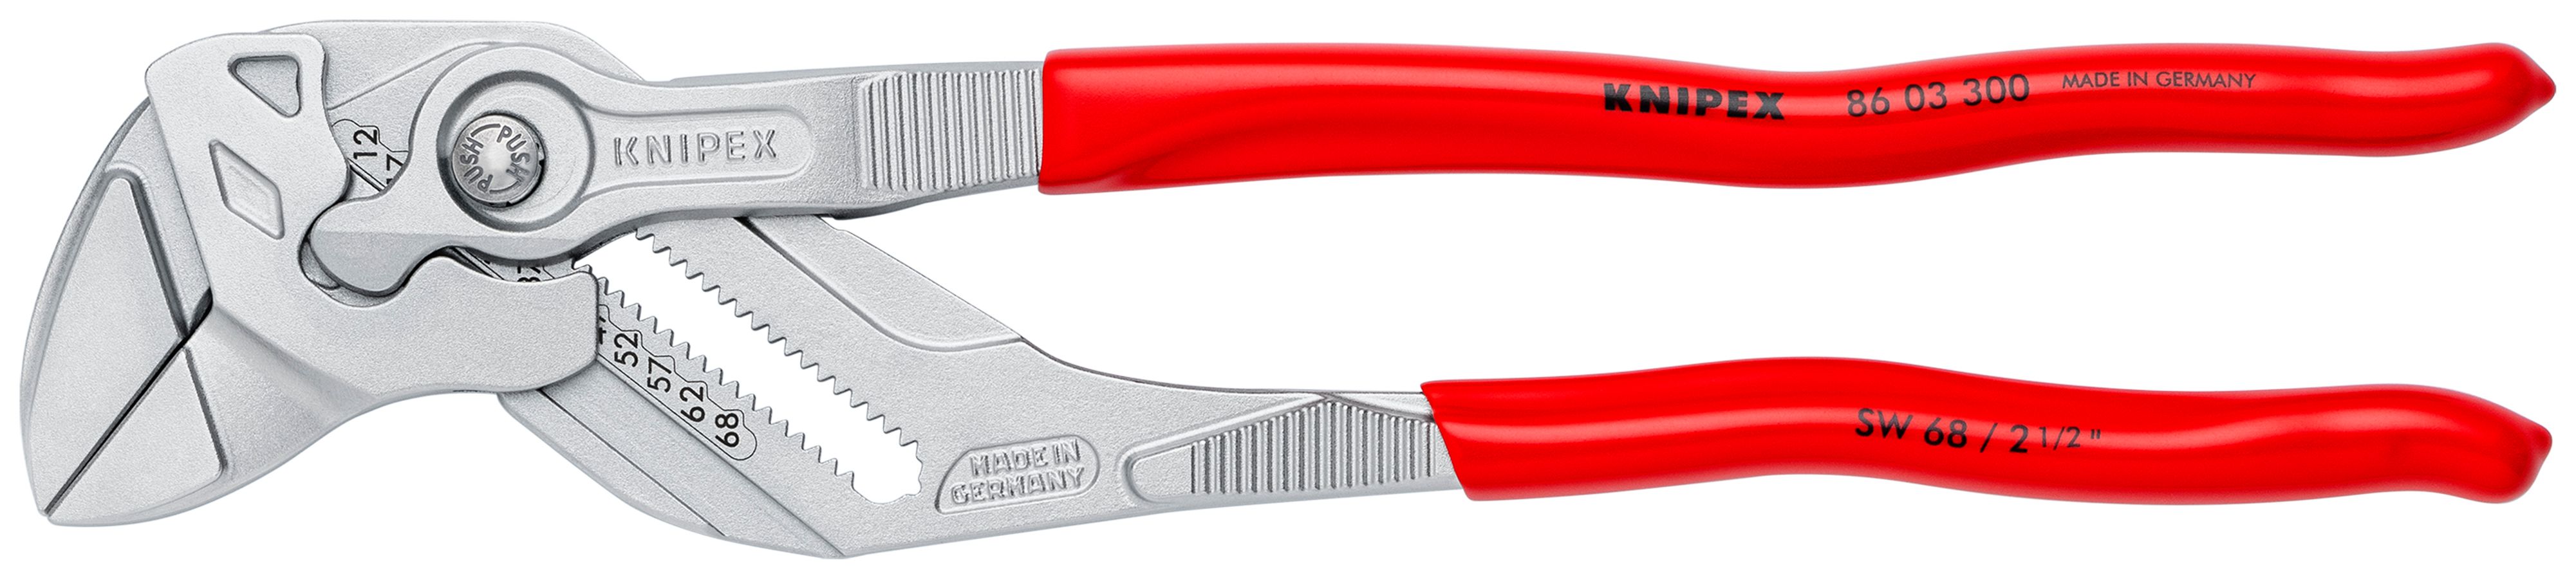 7″ Pipe Wrench Pliers, G293P